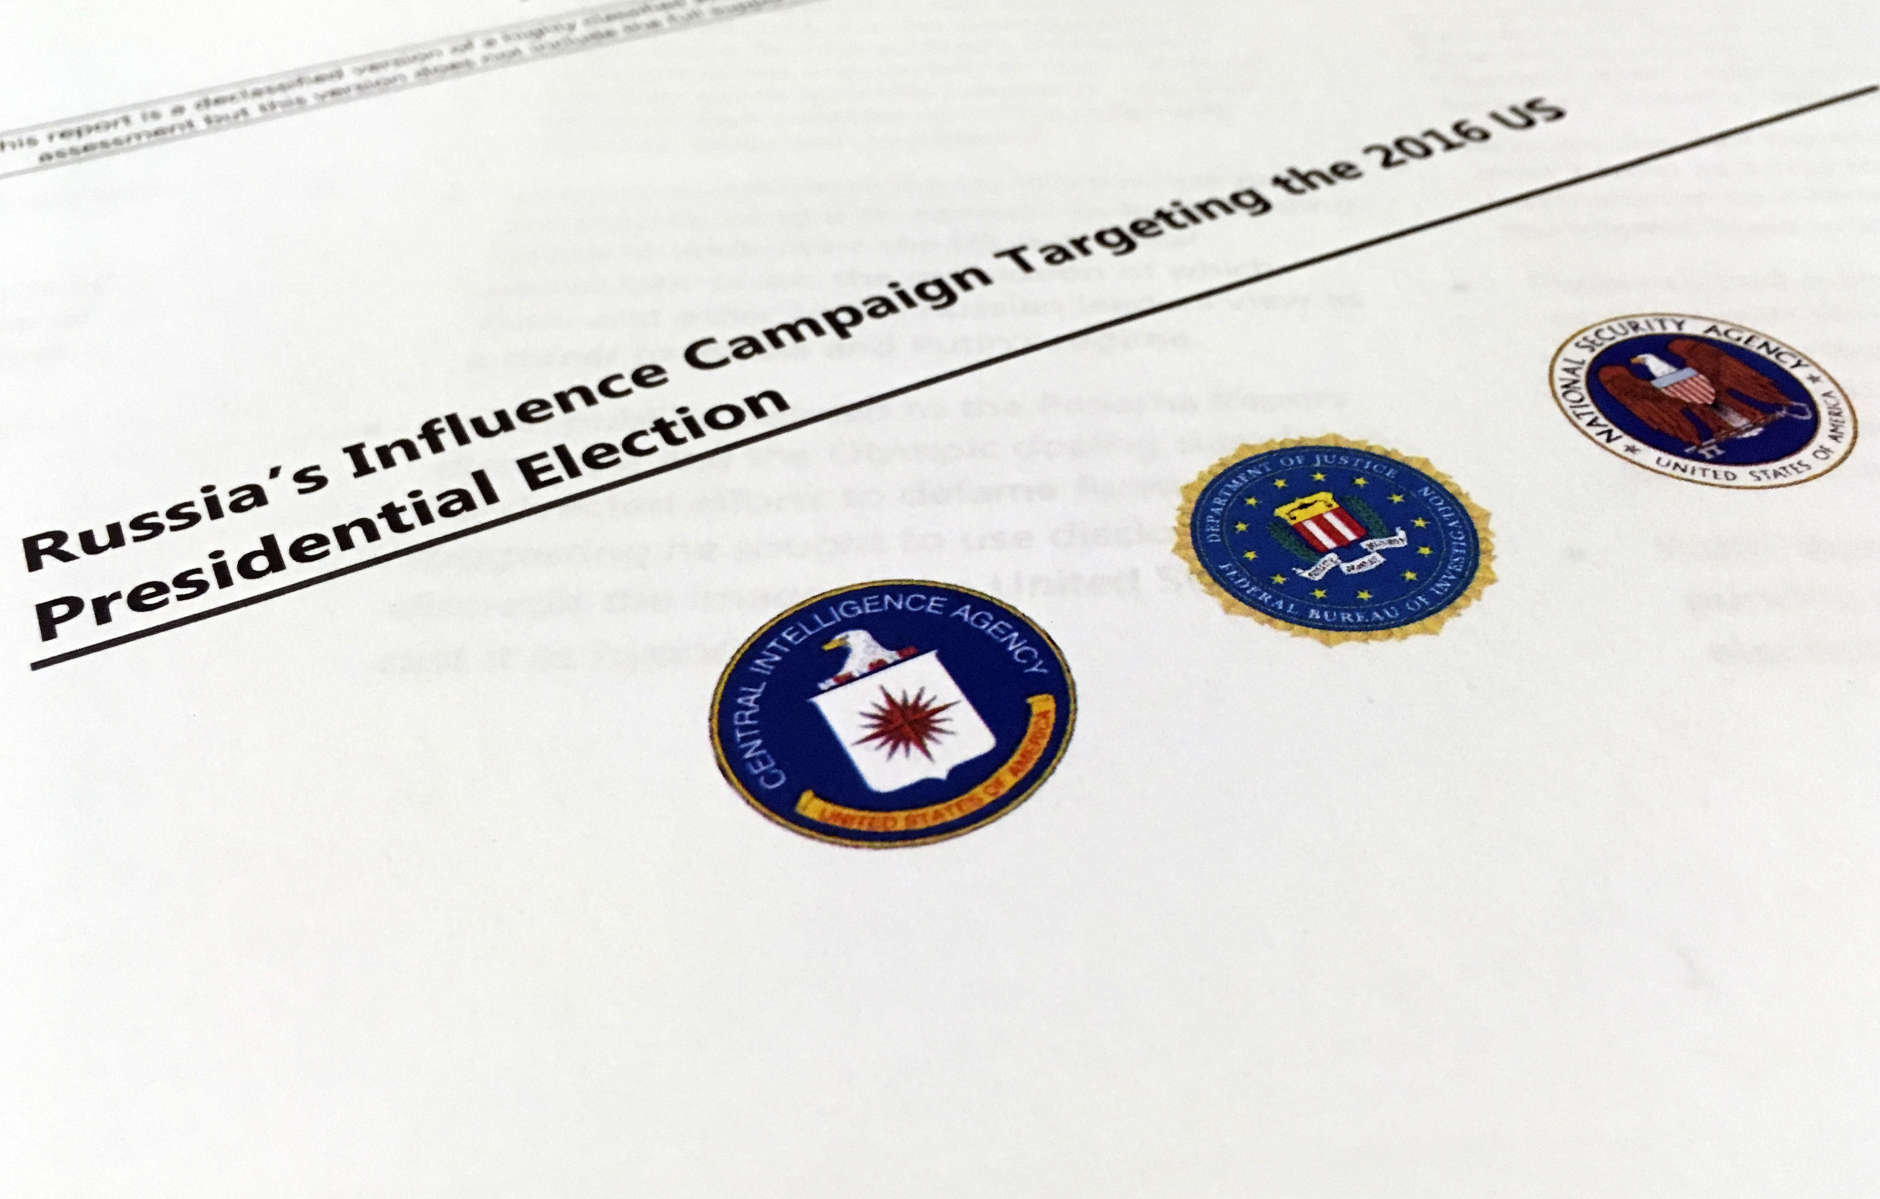 A part of the declassified version Intelligence Community Assessment on Russia's efforts to interfere with the U.S. political process is photographed in Washington, Friday, Jan. 6, 2017. Russian President Vladimir Putin ordered a campaign to influence the American presidential election in favor of electing Donald Trump, according to the report issued by U.S. intelligence agencies. The unclassified version was the most detailed public account to date of Russian efforts to interfere with the U.S. political process, with actions that included hacking into the email accounts of the Democratic National Committee and individual Democrats like Hillary Clinton's campaign chairman John Podesta. (AP Photo/Jon Elswick)